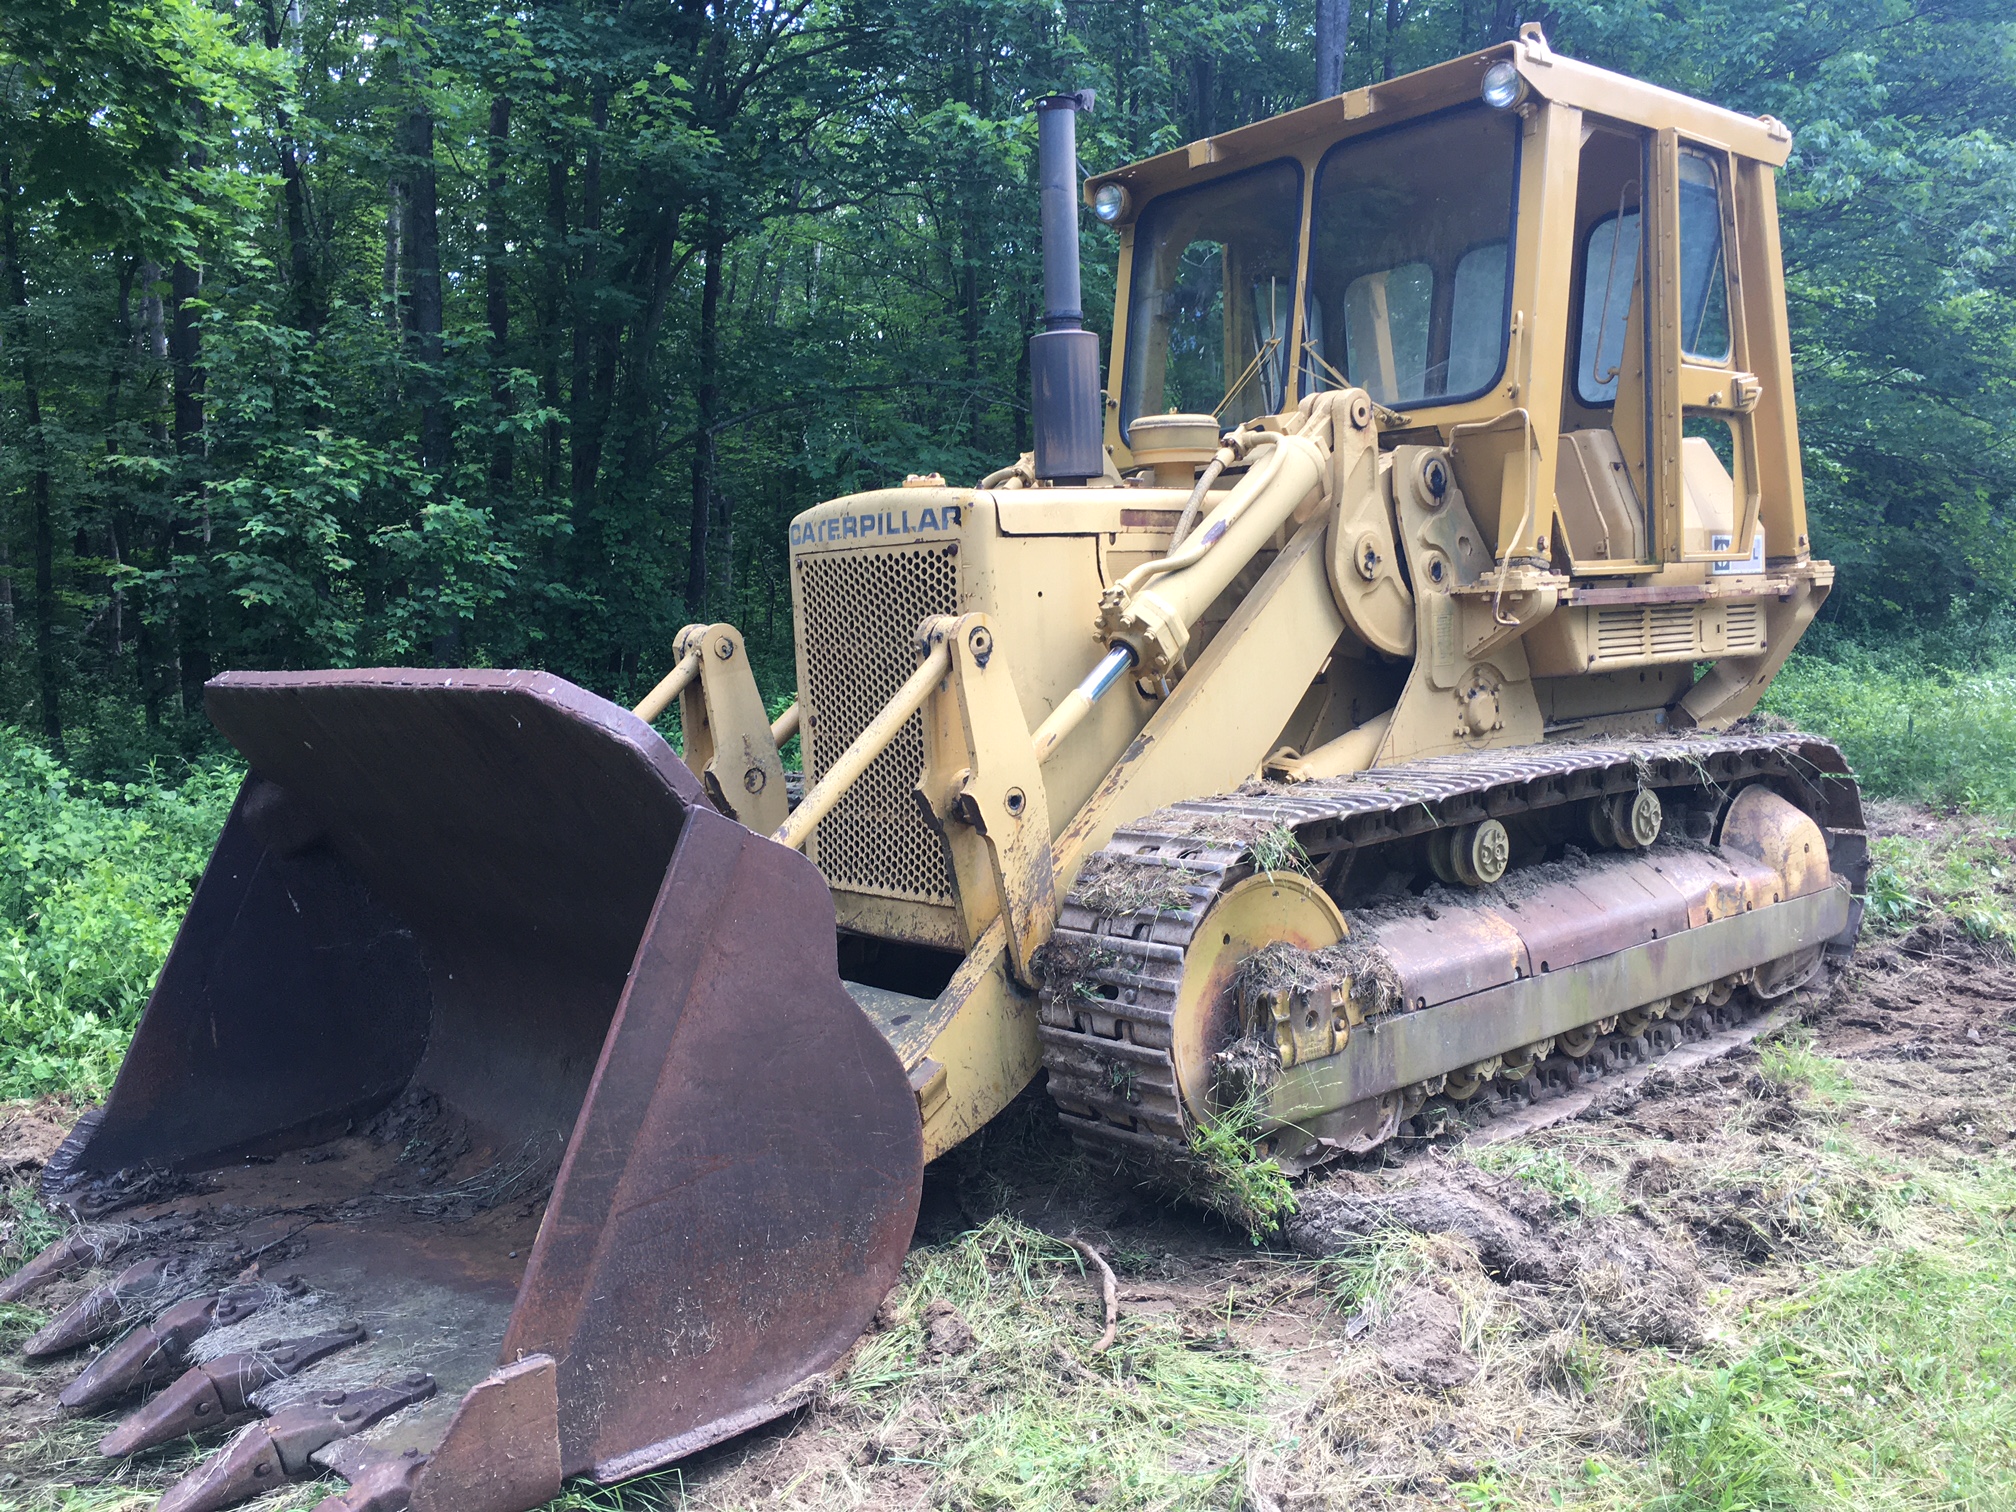 Caterpillar 977L Track Loader. Model year 1977 with a 6 cylinder 190 horsepower 3306 engine. Newer rollers, idelers, and track tension pistons repacked. Enclosed ROPS. Approximate 4 - 4.5 yard bucket. Weight 47'641 lbs.